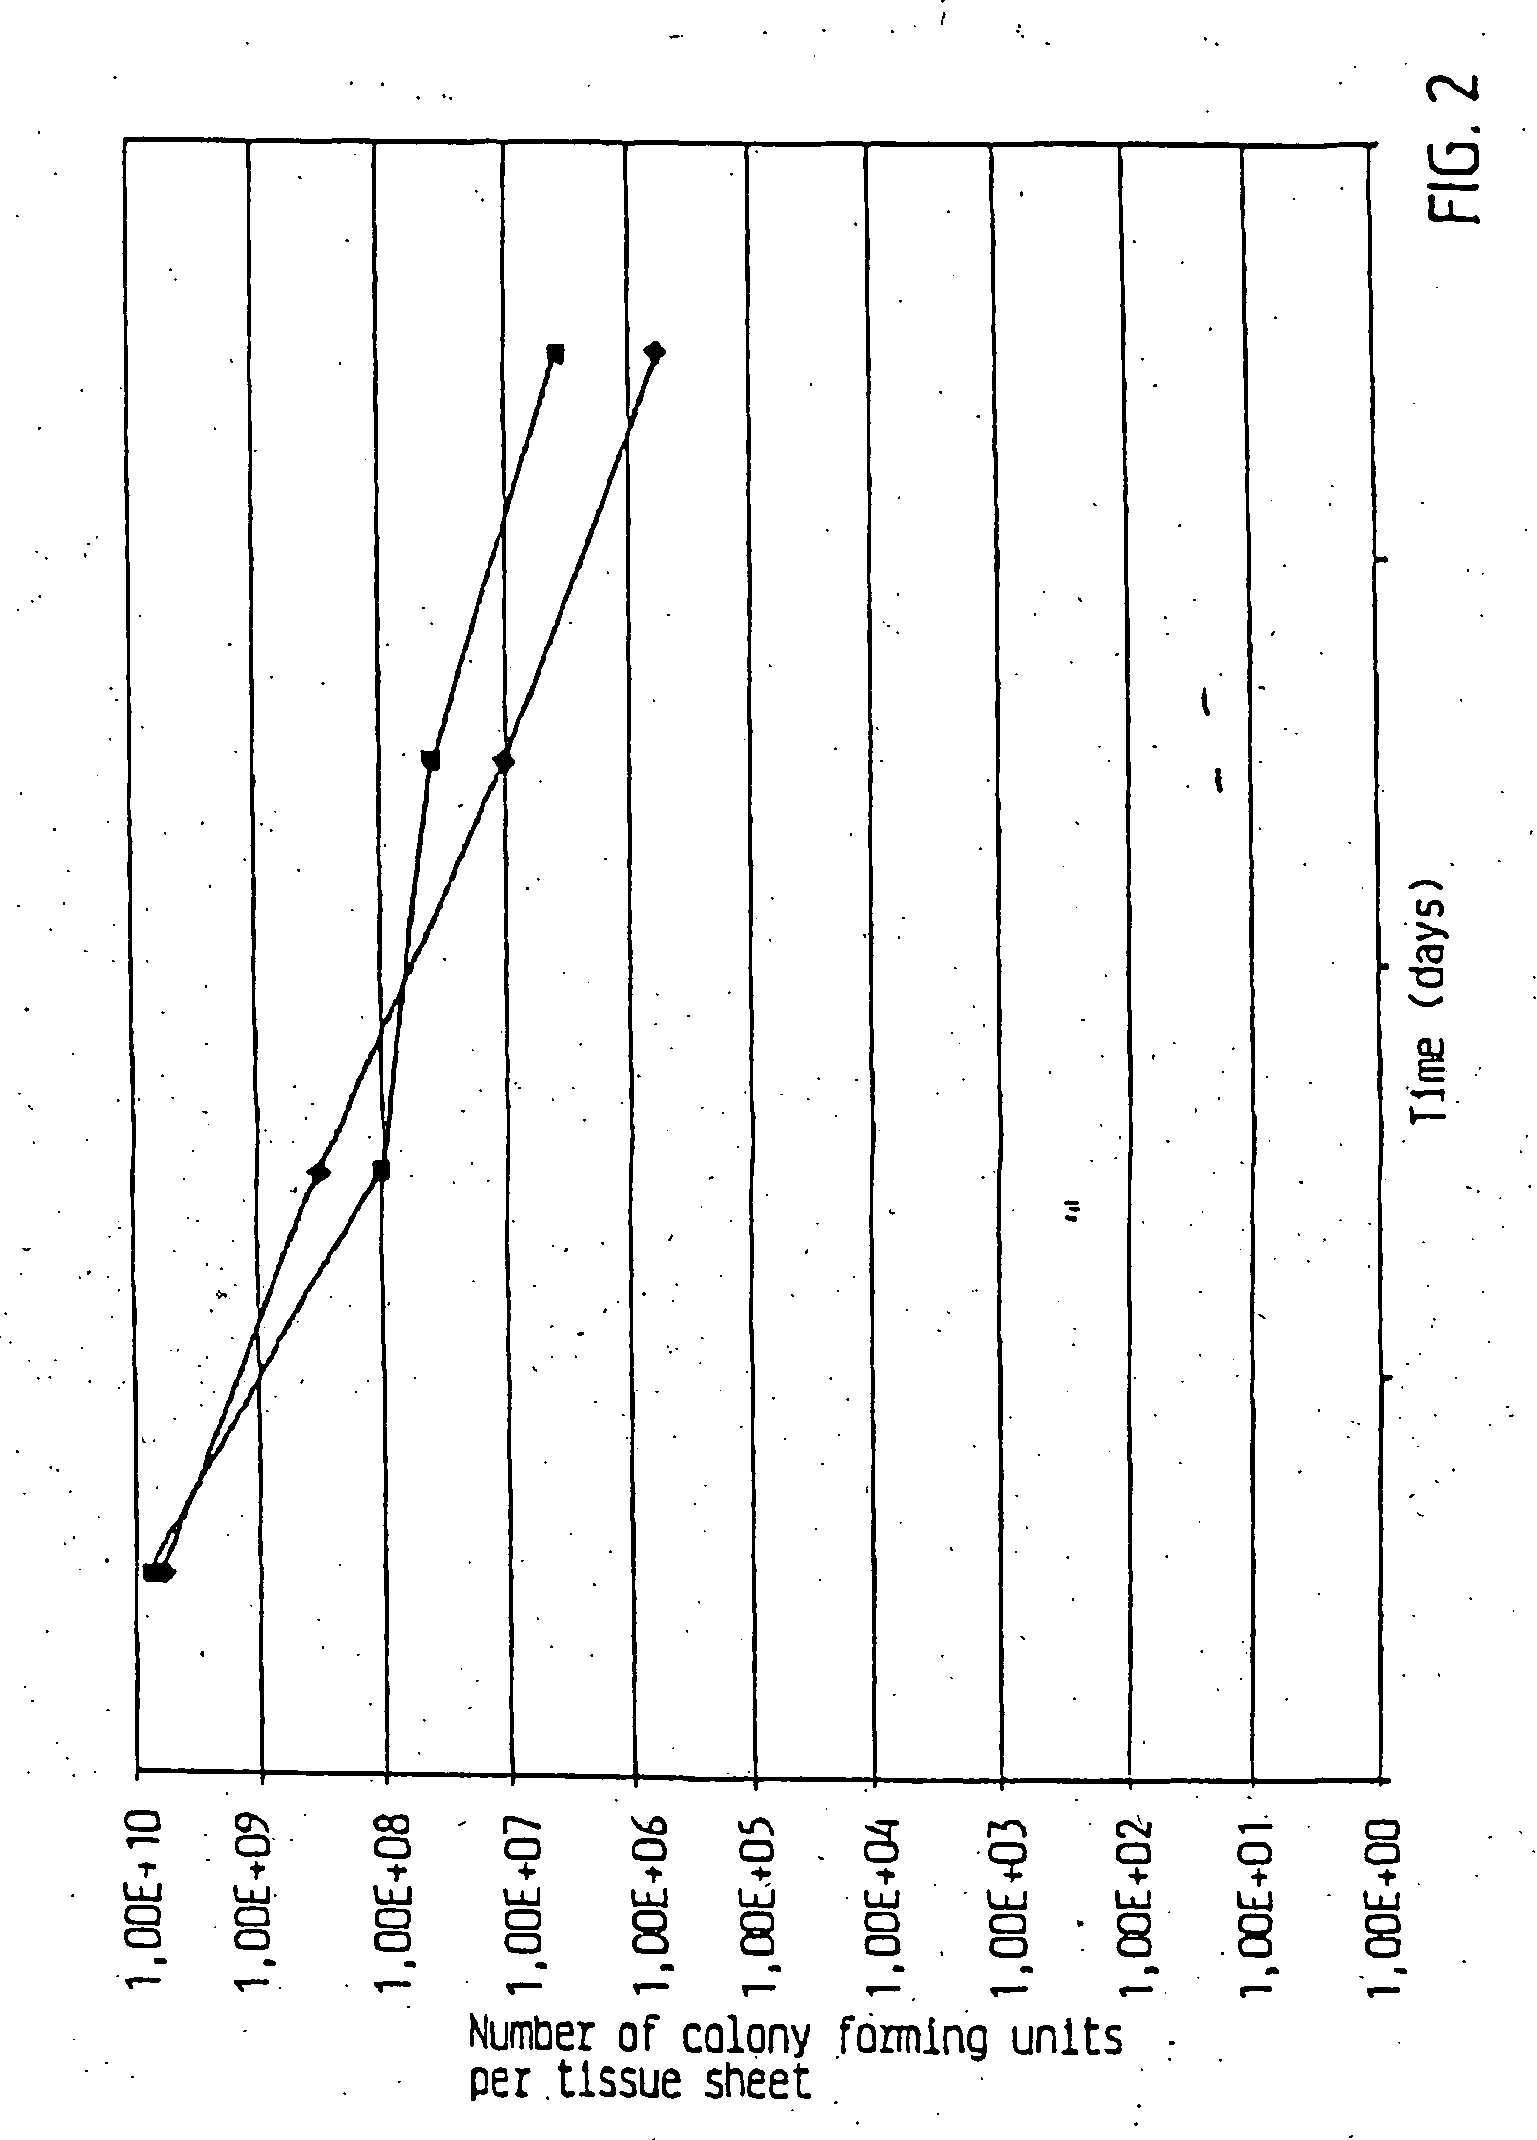 Hygiene tissue with lactic acid producing bacterial strains